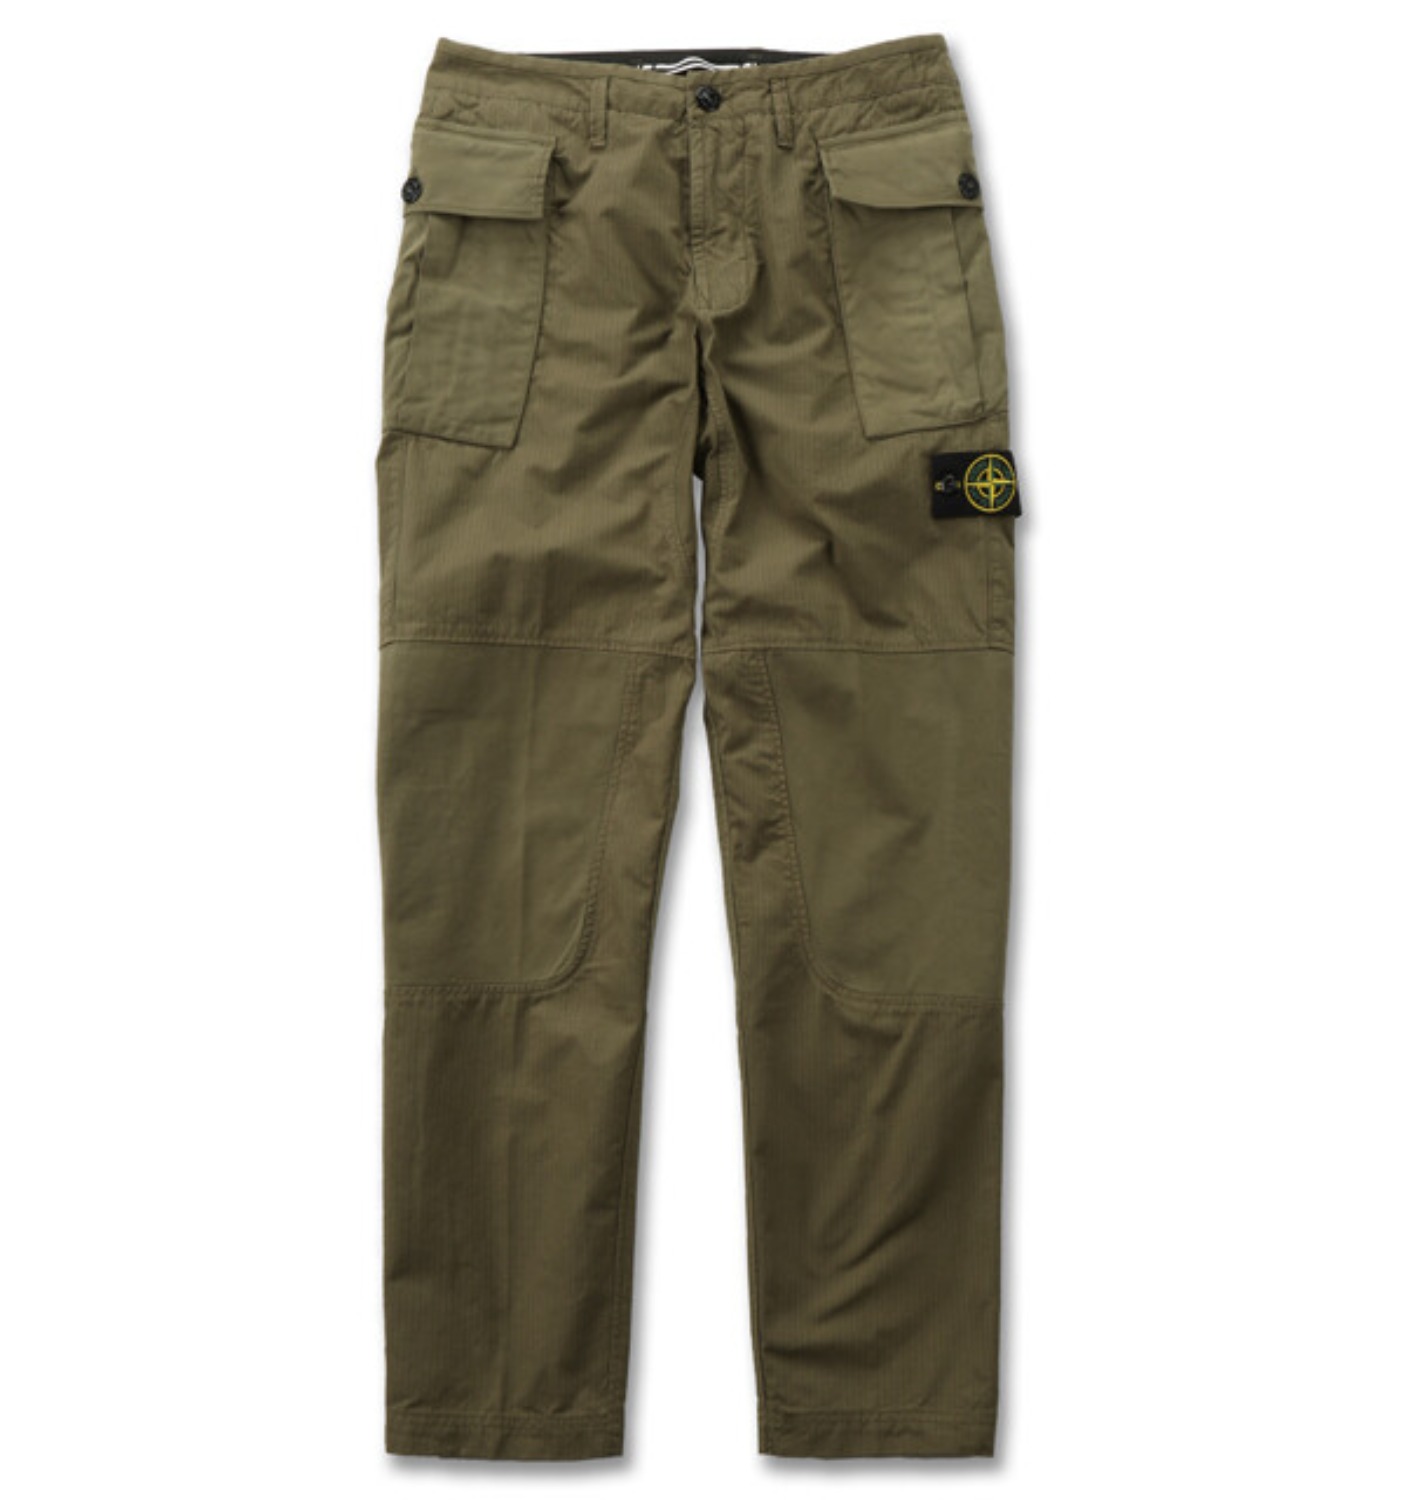 GAUZED COTTON RIP STOP GARMENT DYED PANTS OLIVE